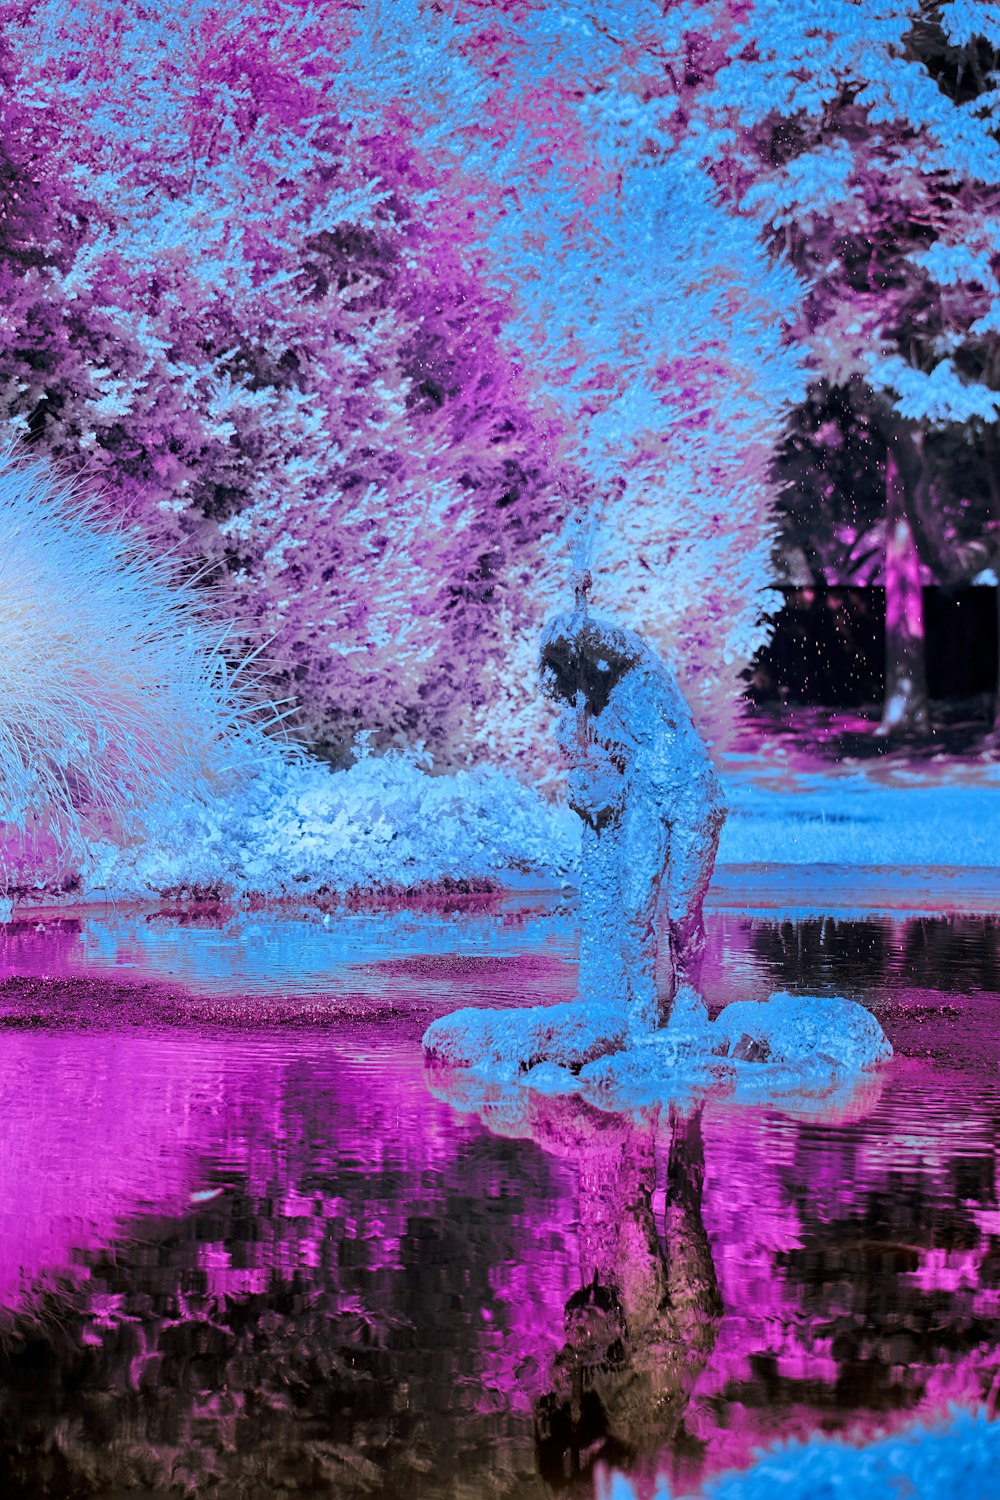 a person standing on a skateboard in front of a pond